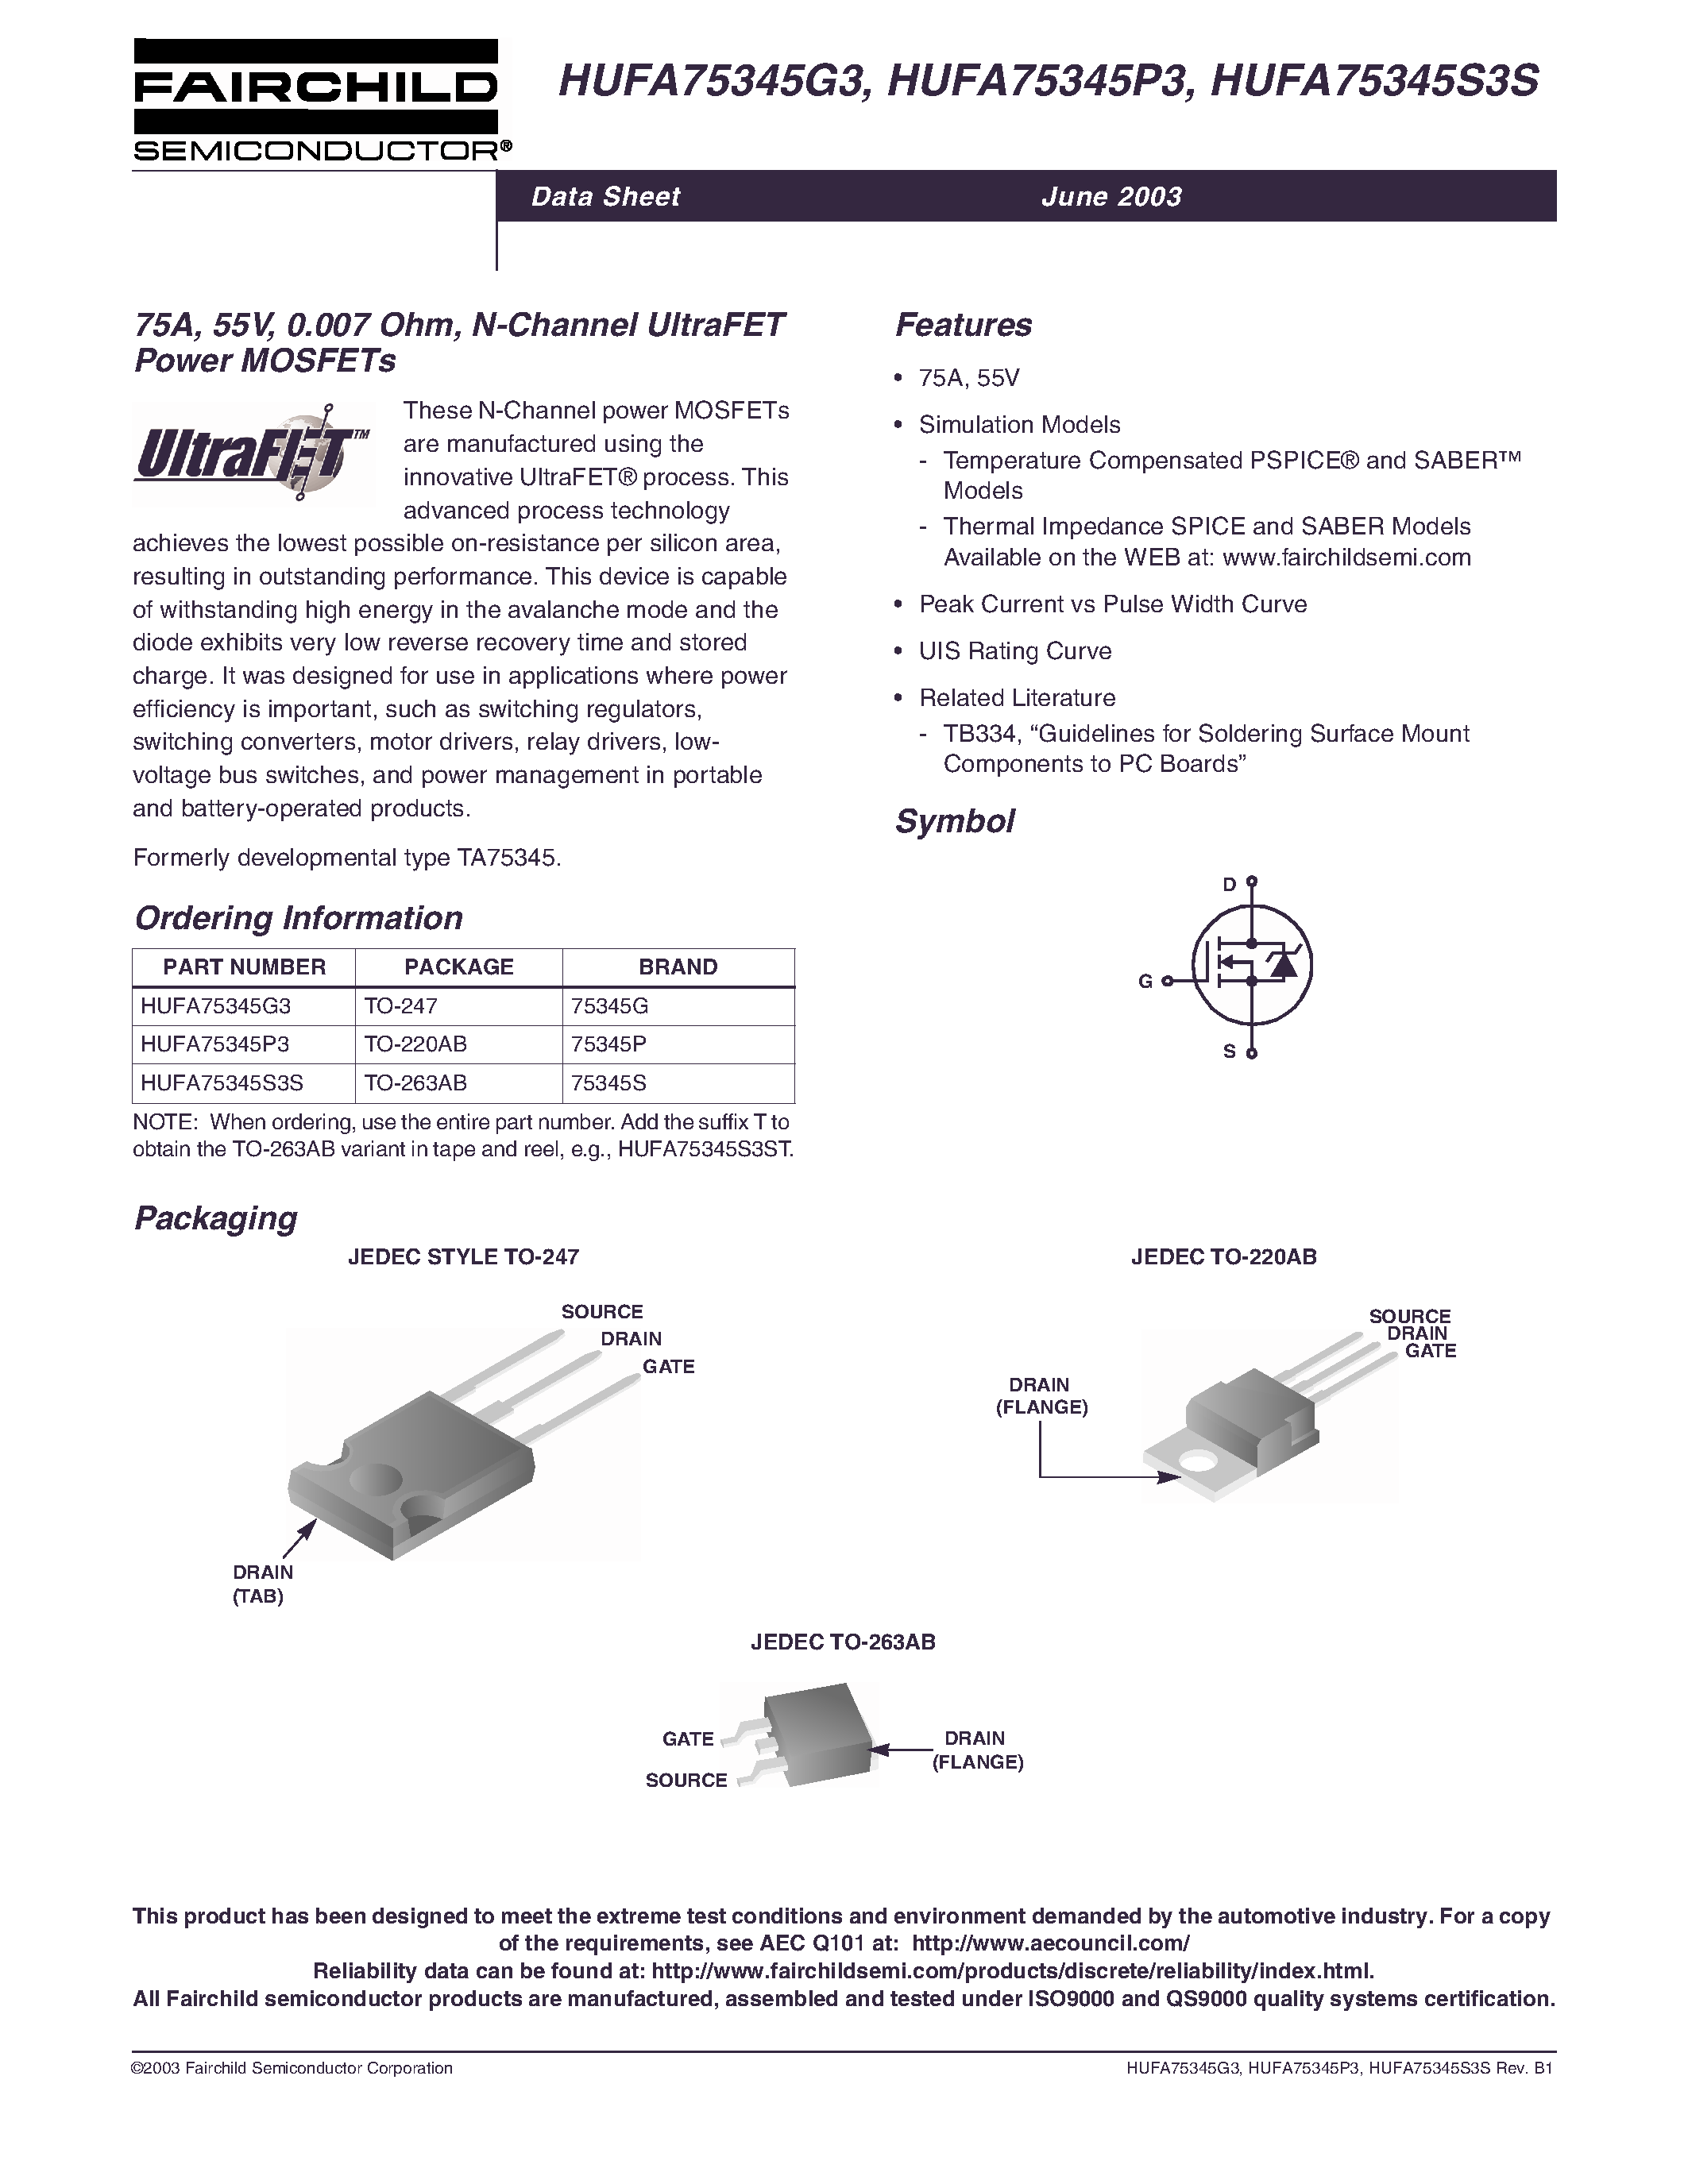 Datasheet HUFA75345P3 - 75A/ 55V/ 0.007 Ohm/ N-Channel UltraFET Power MOSFETs page 1